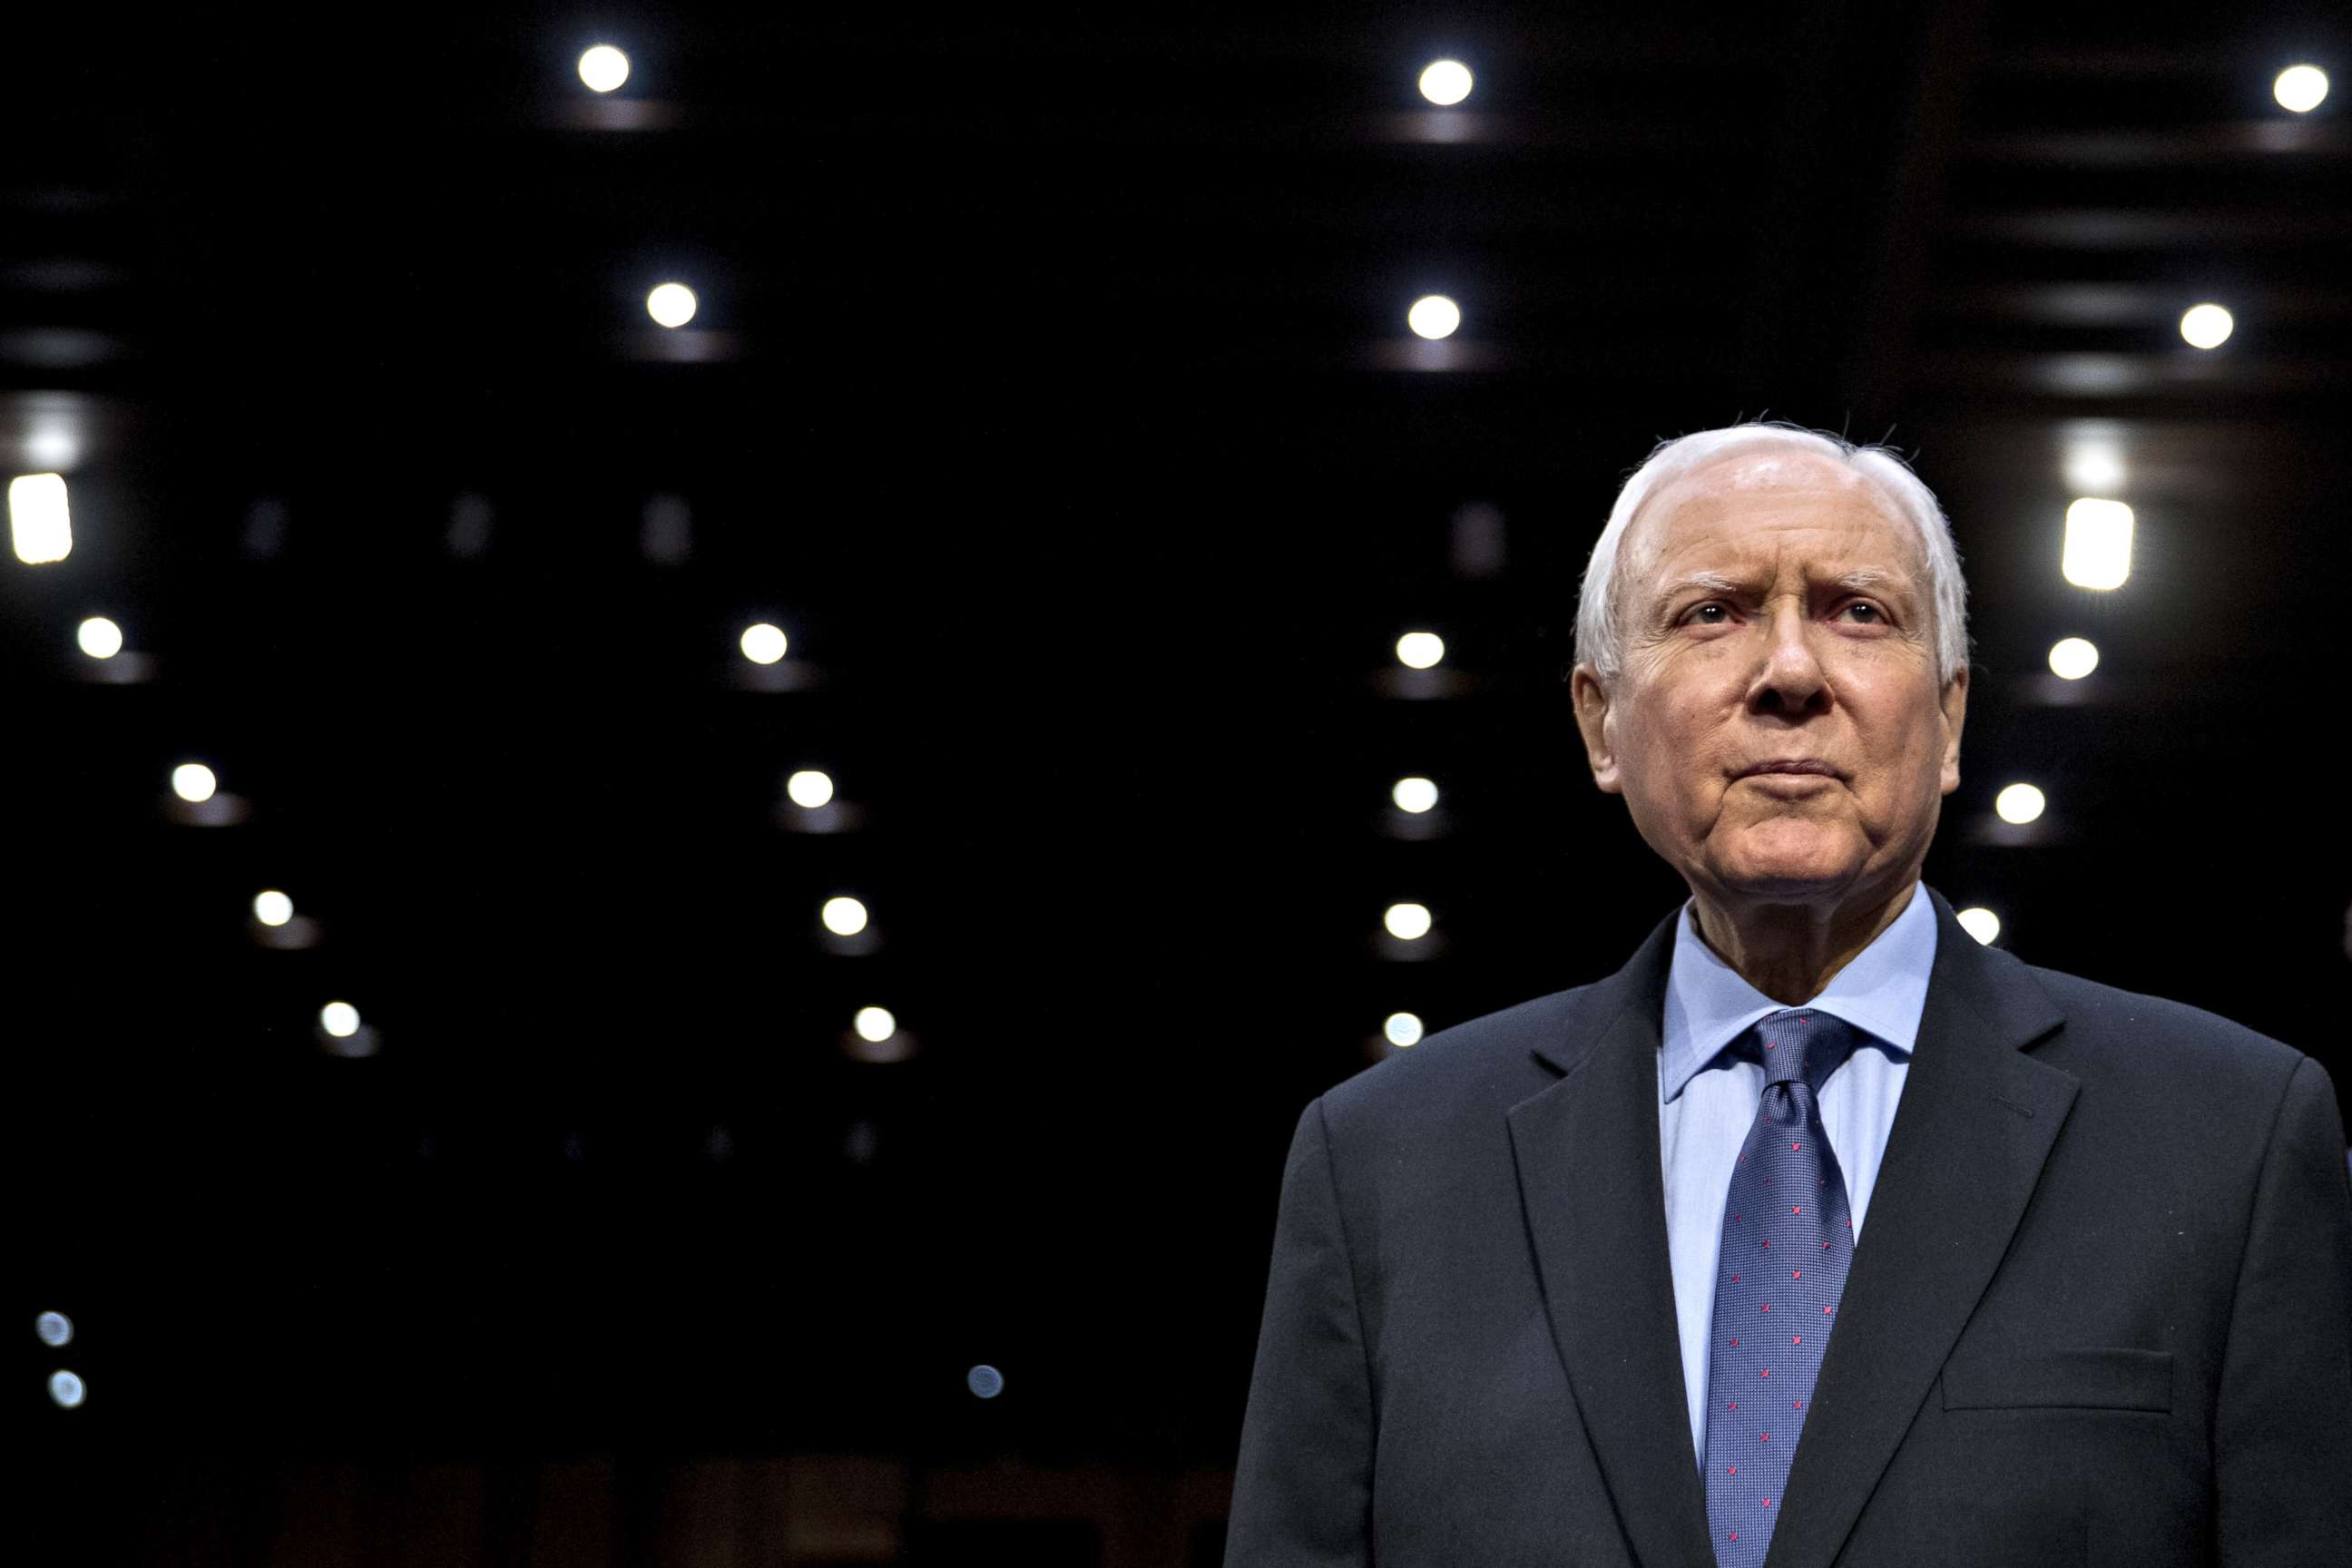 PHOTO: Senator Orrin Hatch arrives to introduce witnesses during a Senate Commerce, Science and Transportation Committee confirmation hearing with Federal Trade Commission (FTC) nominees in Washington, Feb. 14, 2018. 